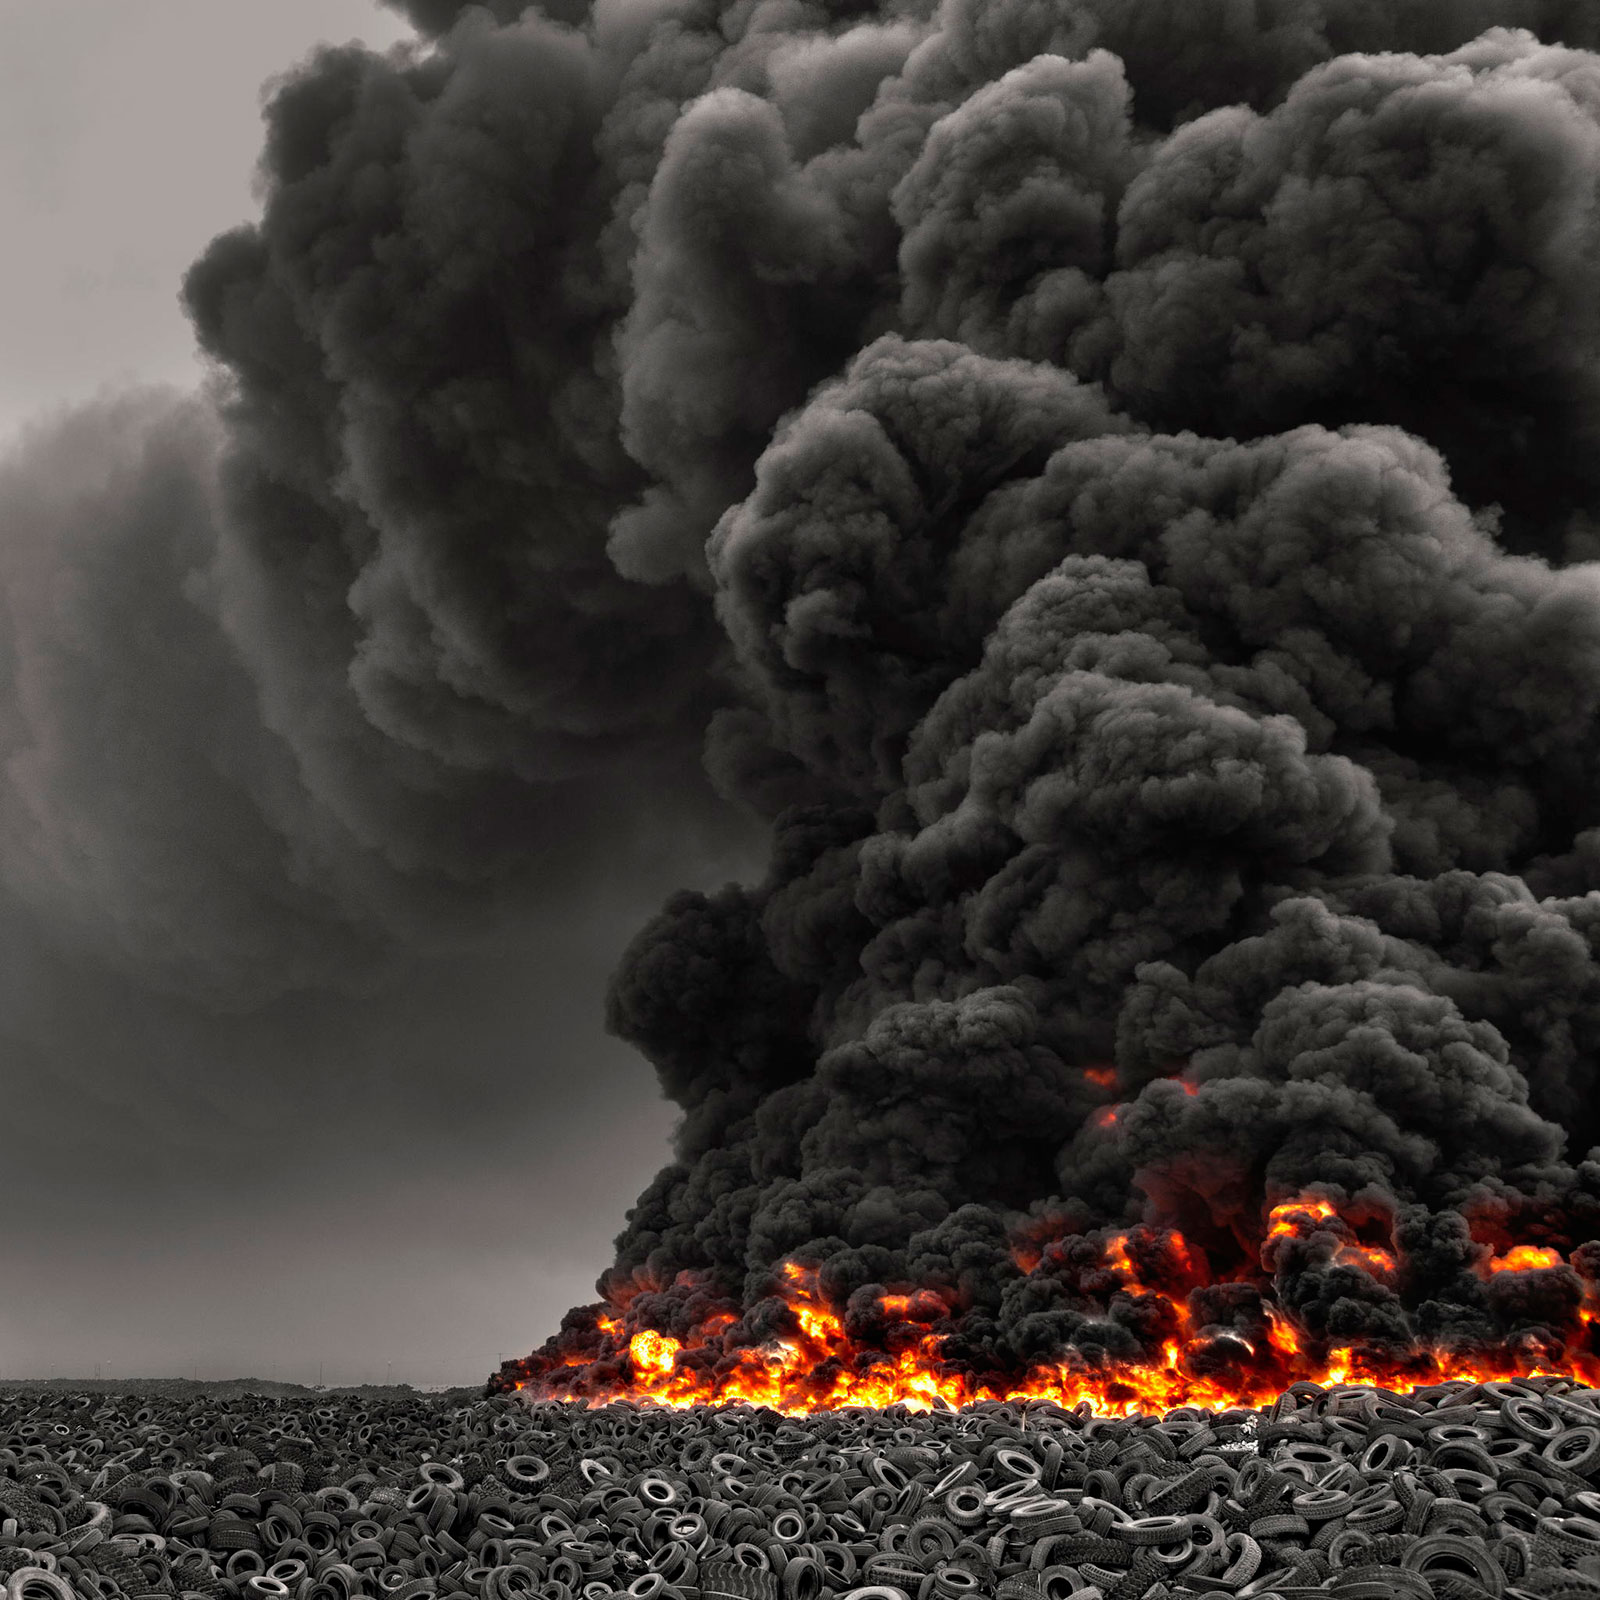 On April 2012 a five million tire fire erupted in Jahra, Kuwait